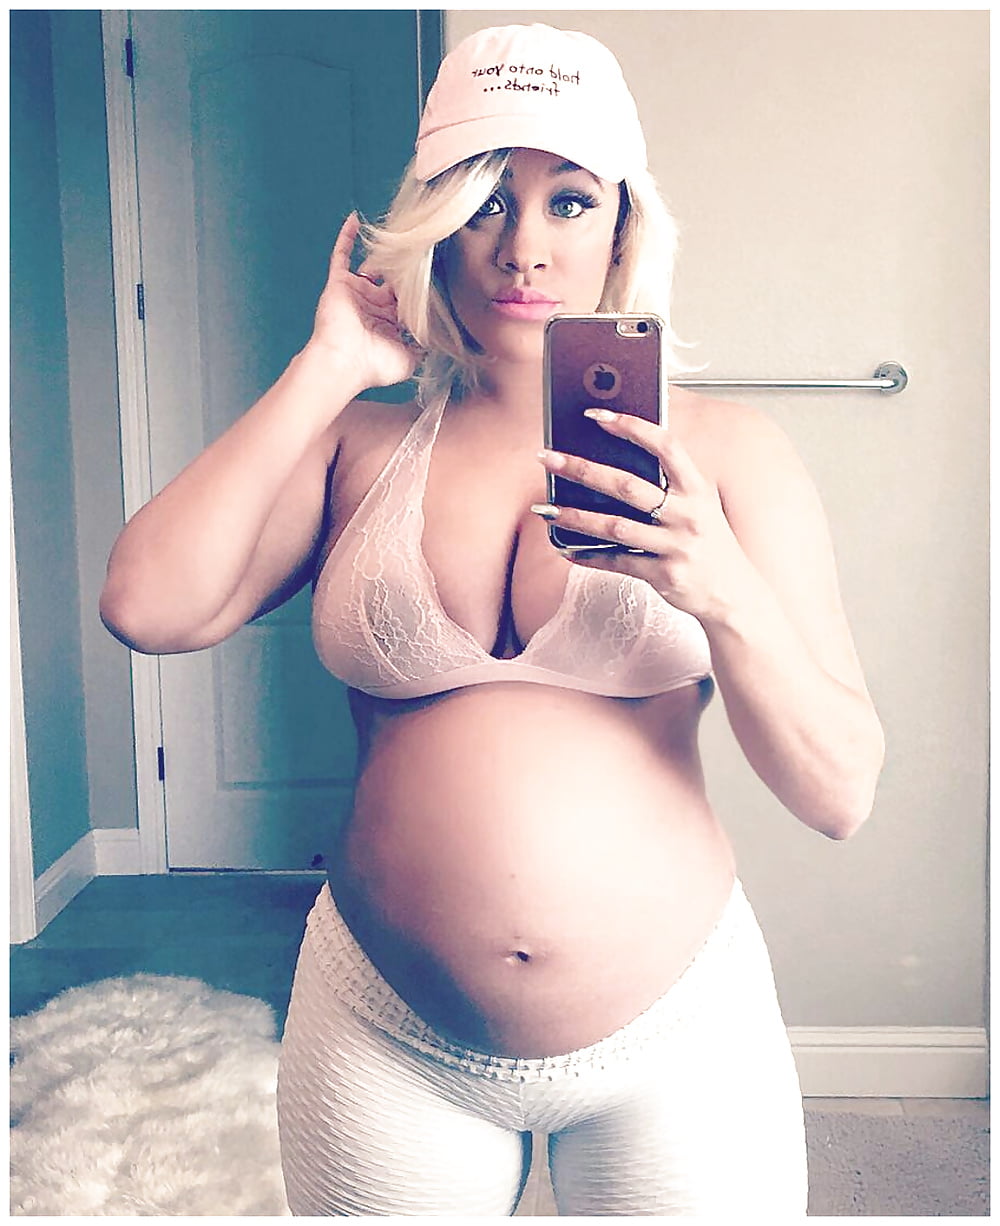 Pregnant woman with huge boobs